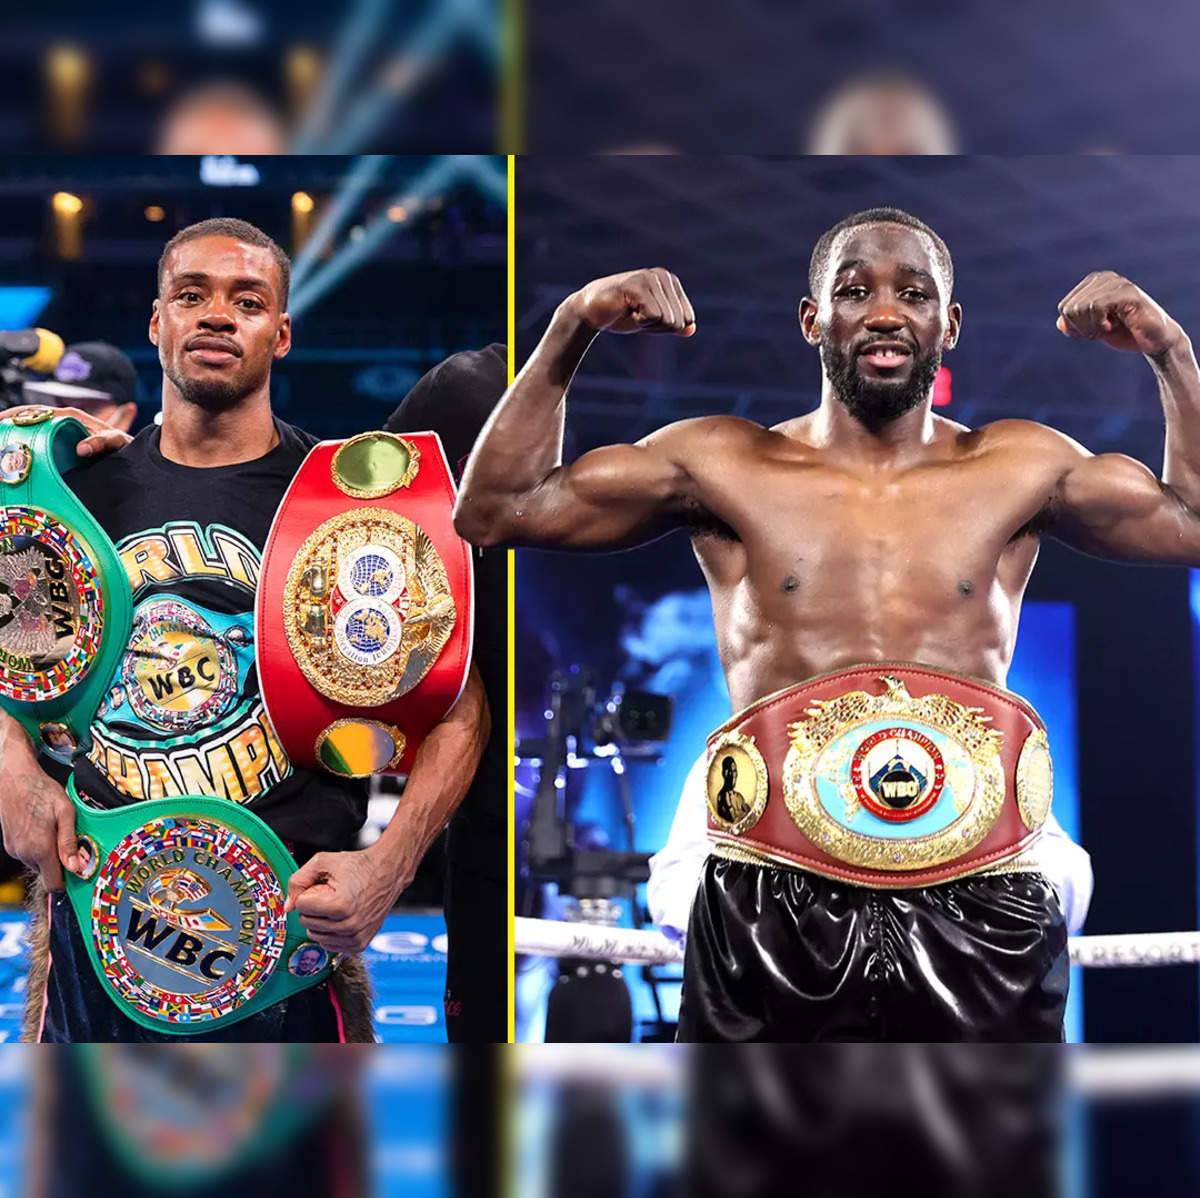 terence crawford vs errol spence jr see fight date start time venue where to watch on tv livestream